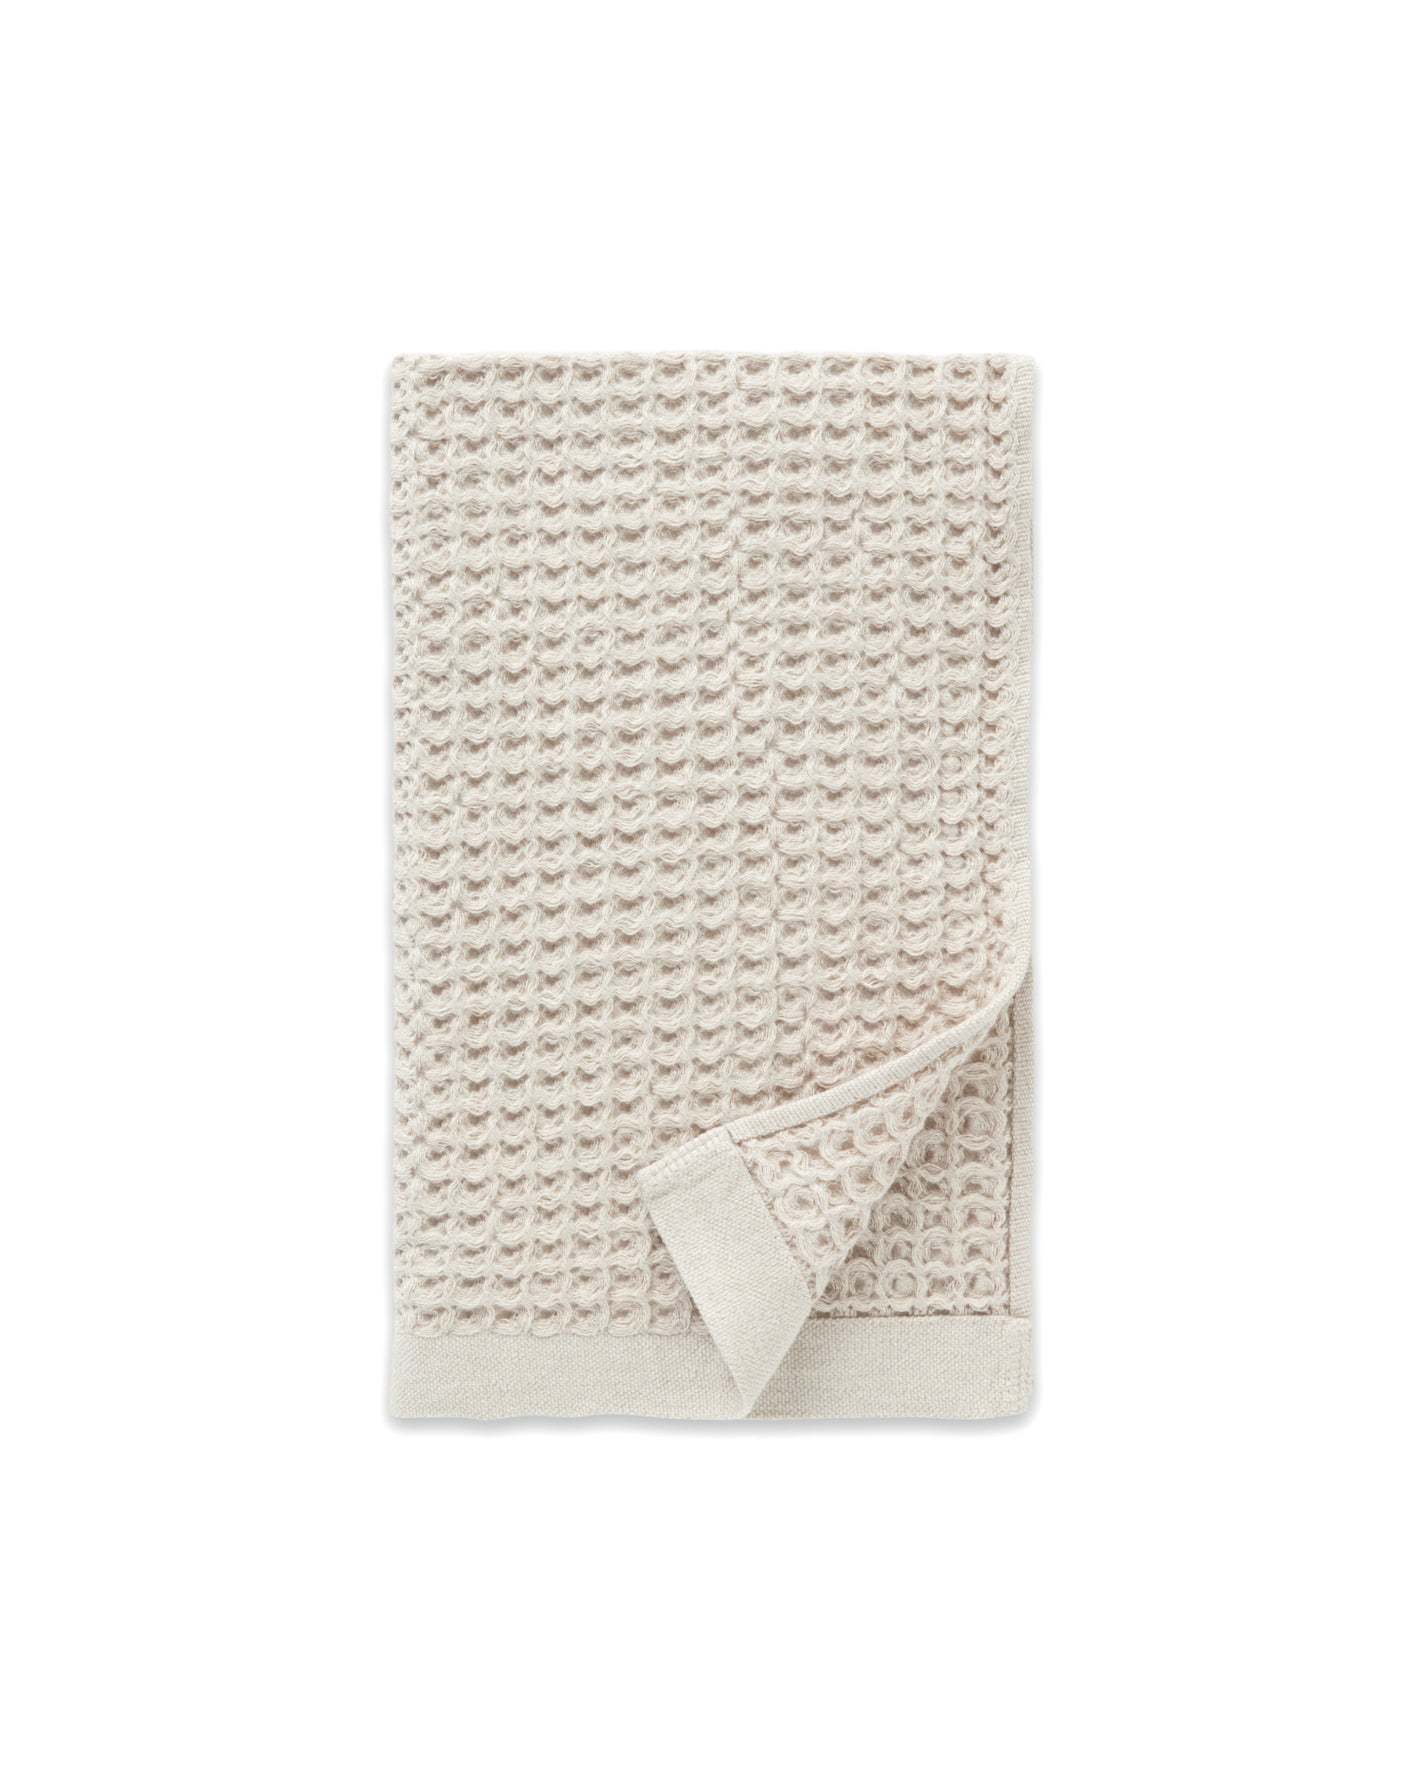 Onsen Hand Towel - Waffle Weave 100% Supima Cotton Towel - Lusciously Soft, Durable, Fast Absorbing Waffle Hand Towel, Sage